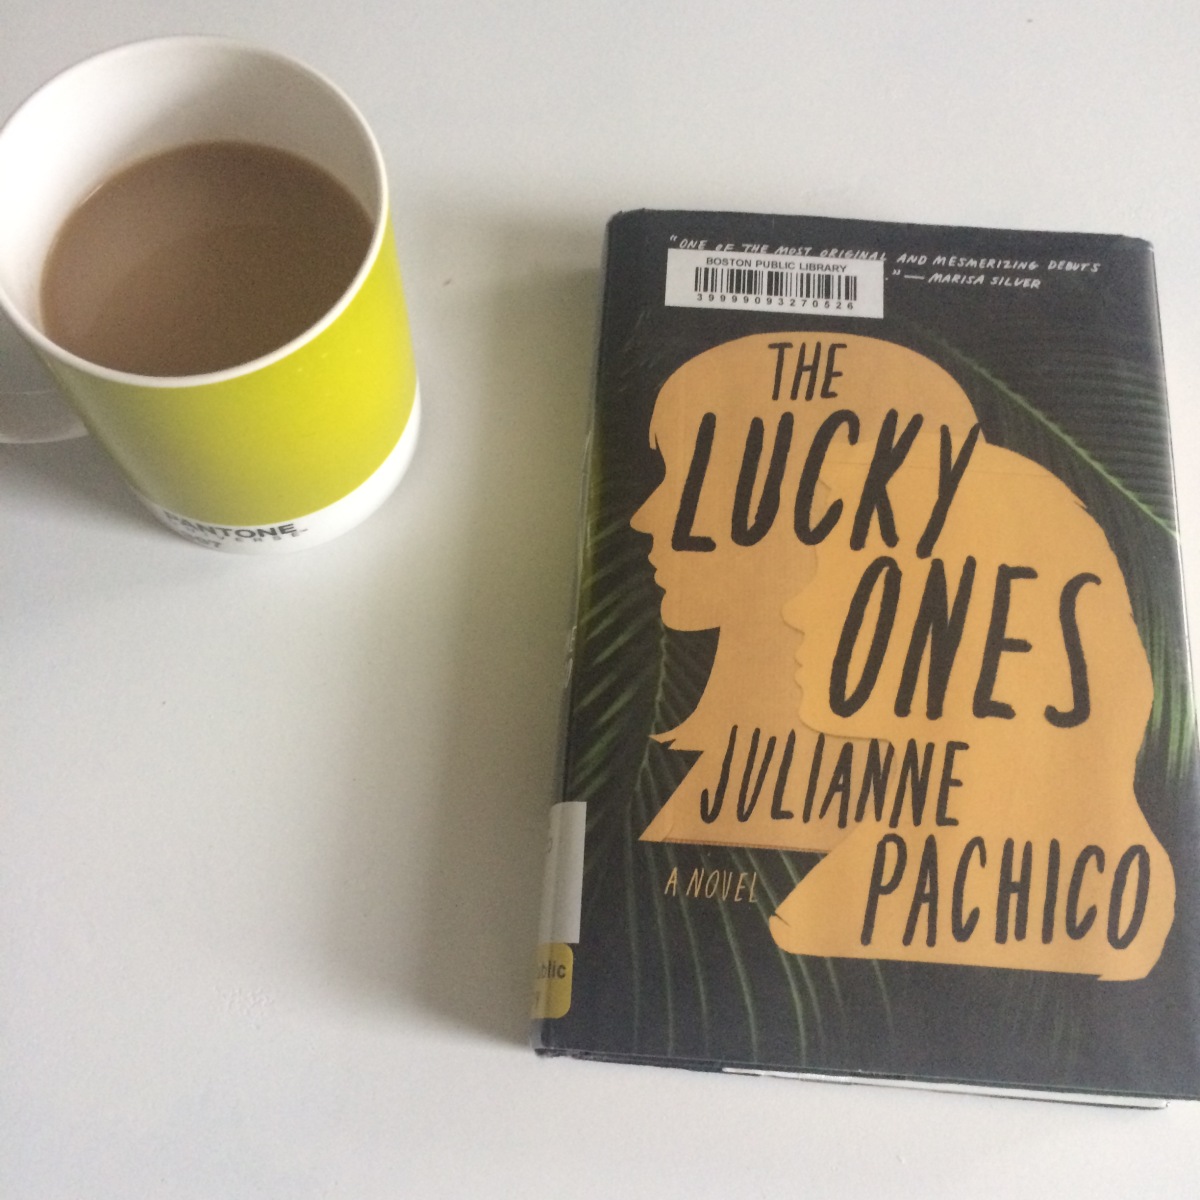 Five Things About The Lucky Ones by Julianne Pachico